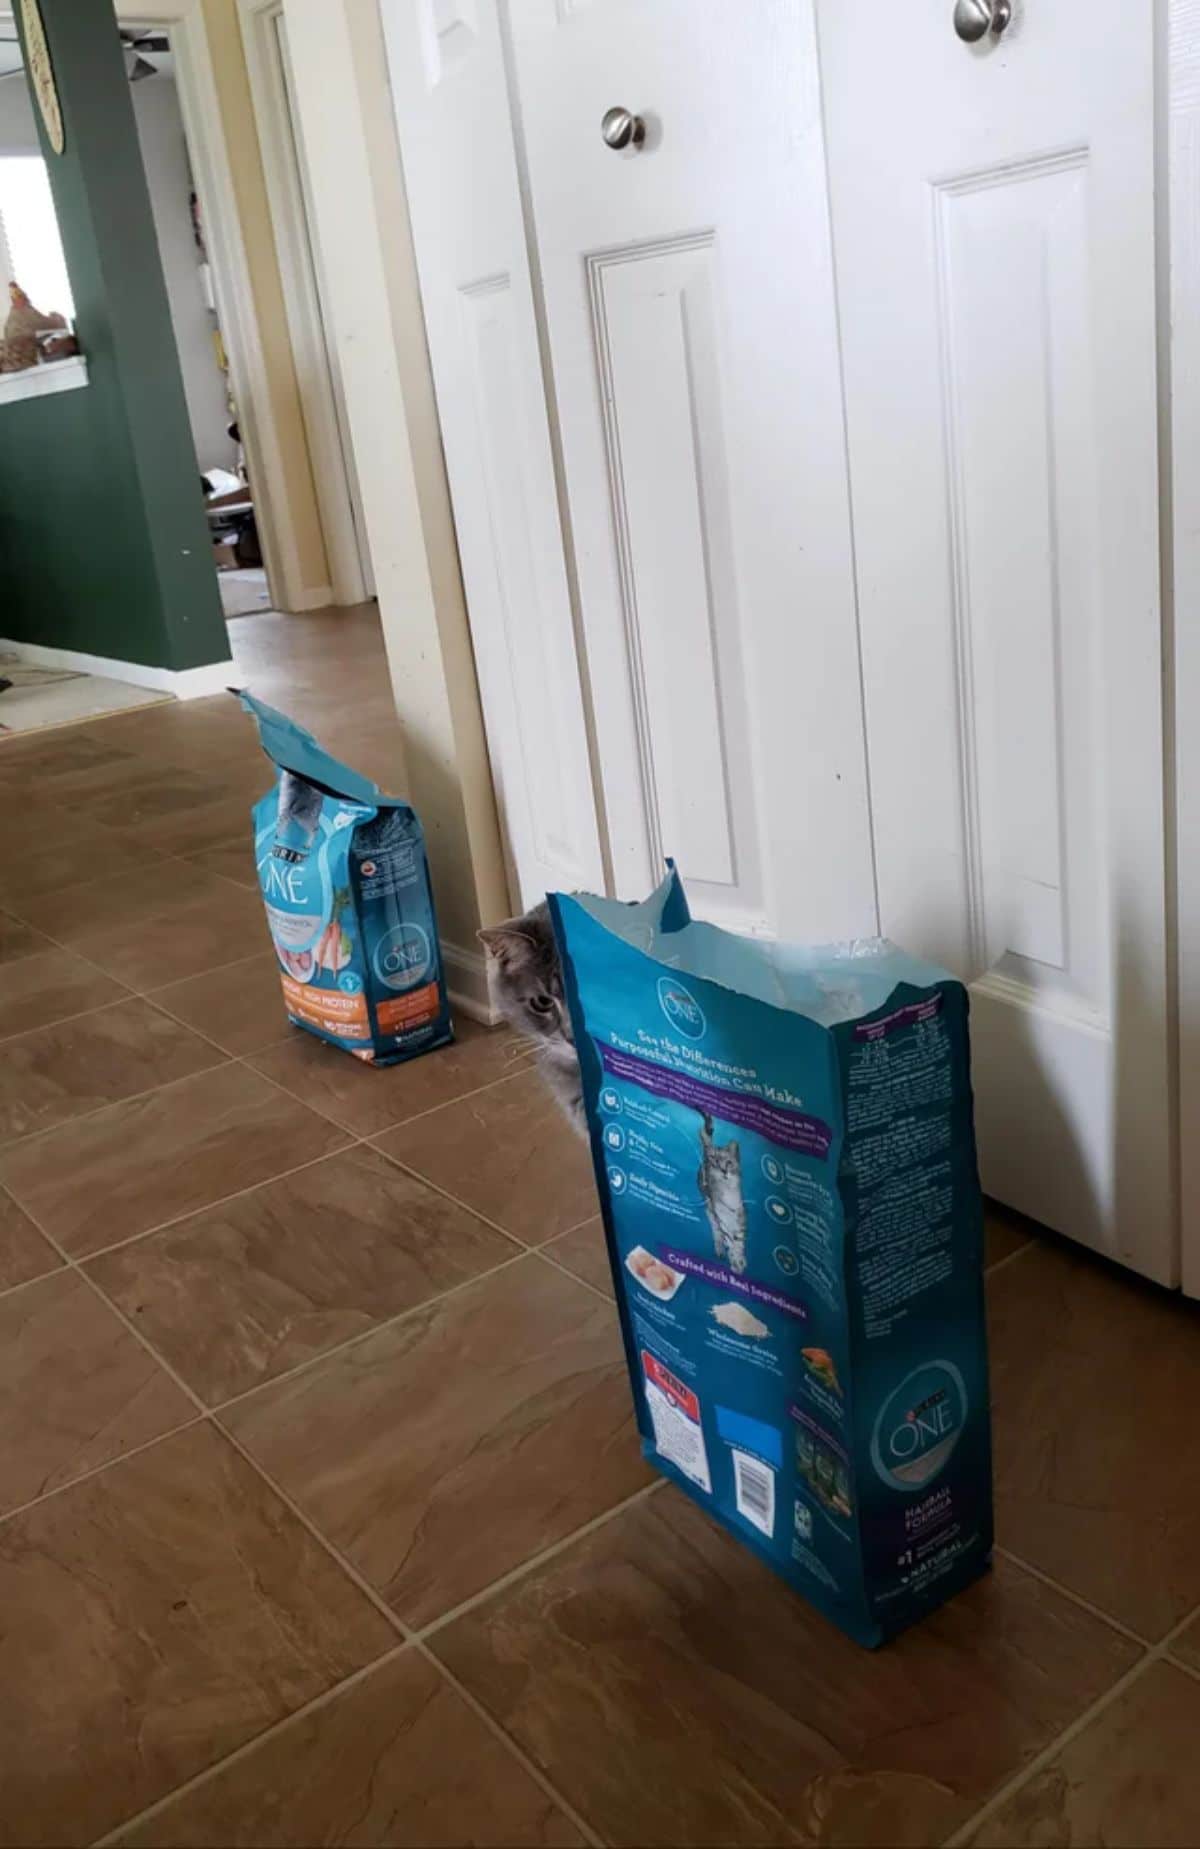 grey and white cat peeking from around a large blue cat food pack standing on the ground